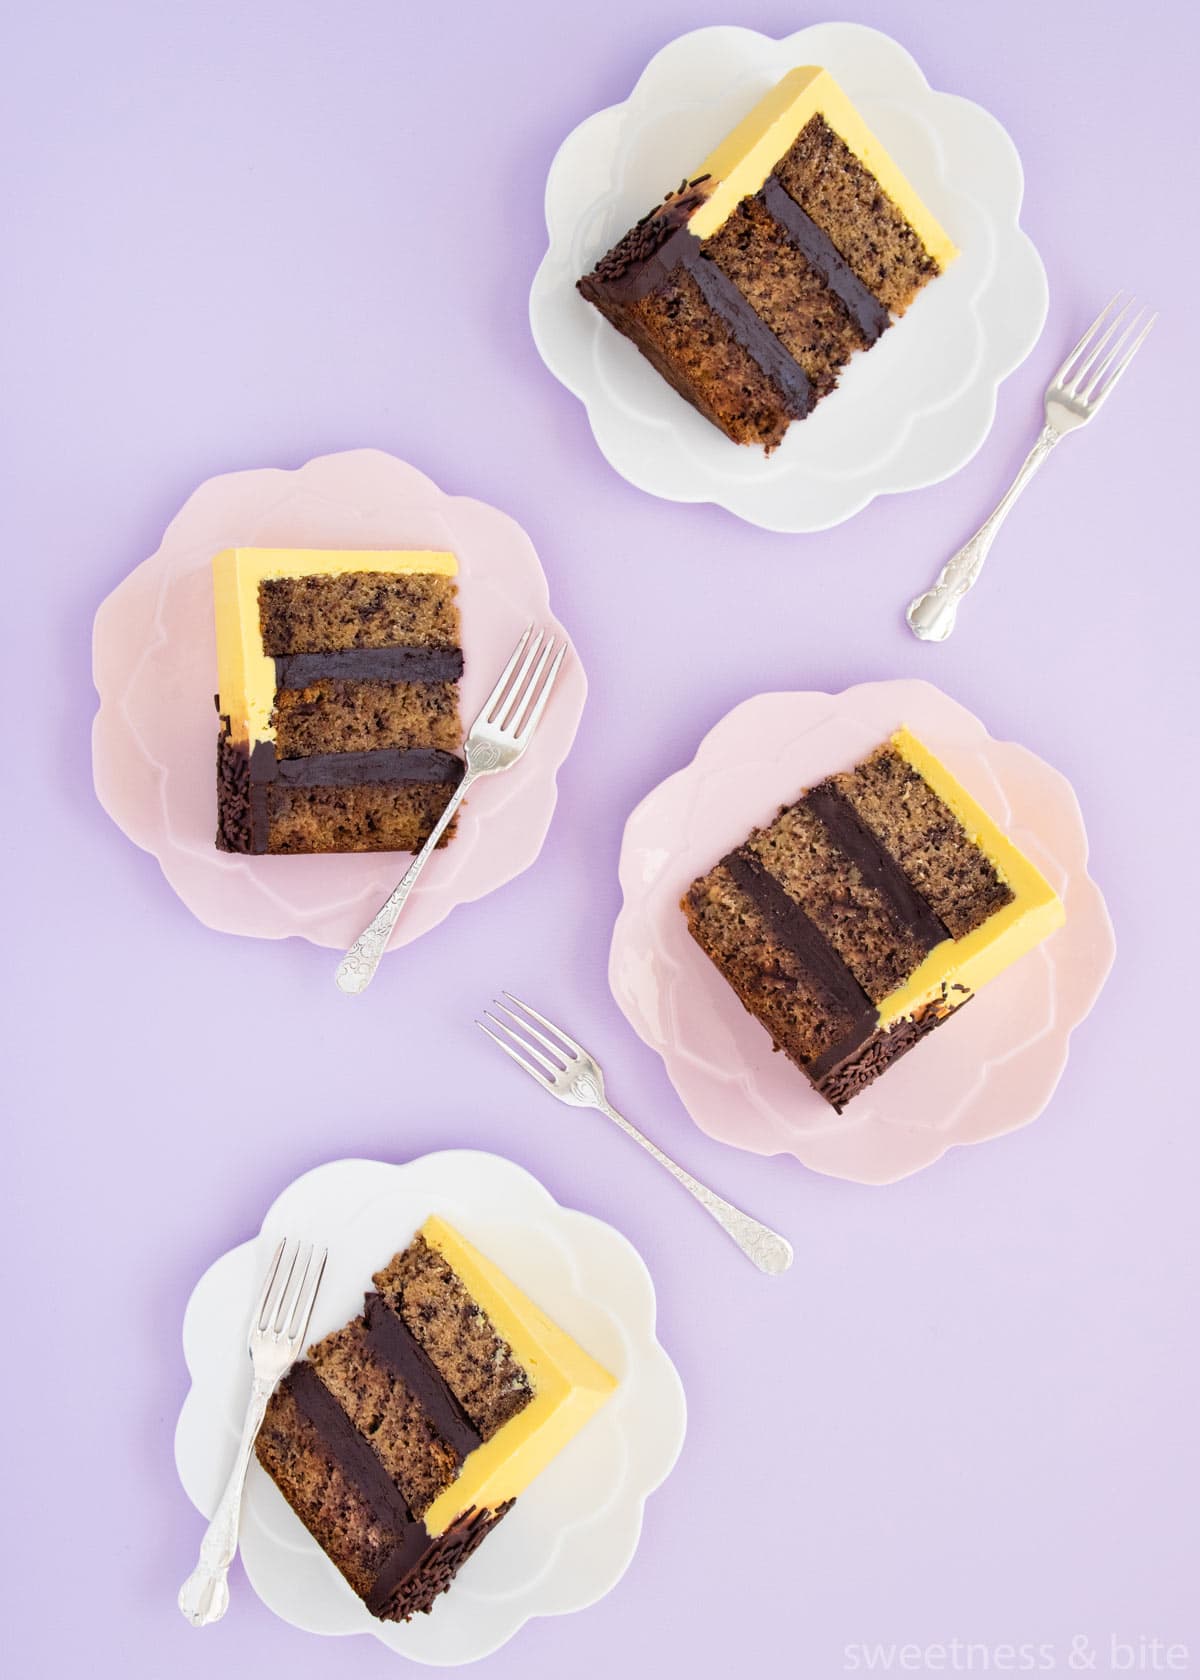 Four slices of banana cake on pink and white plates, on a purple background.